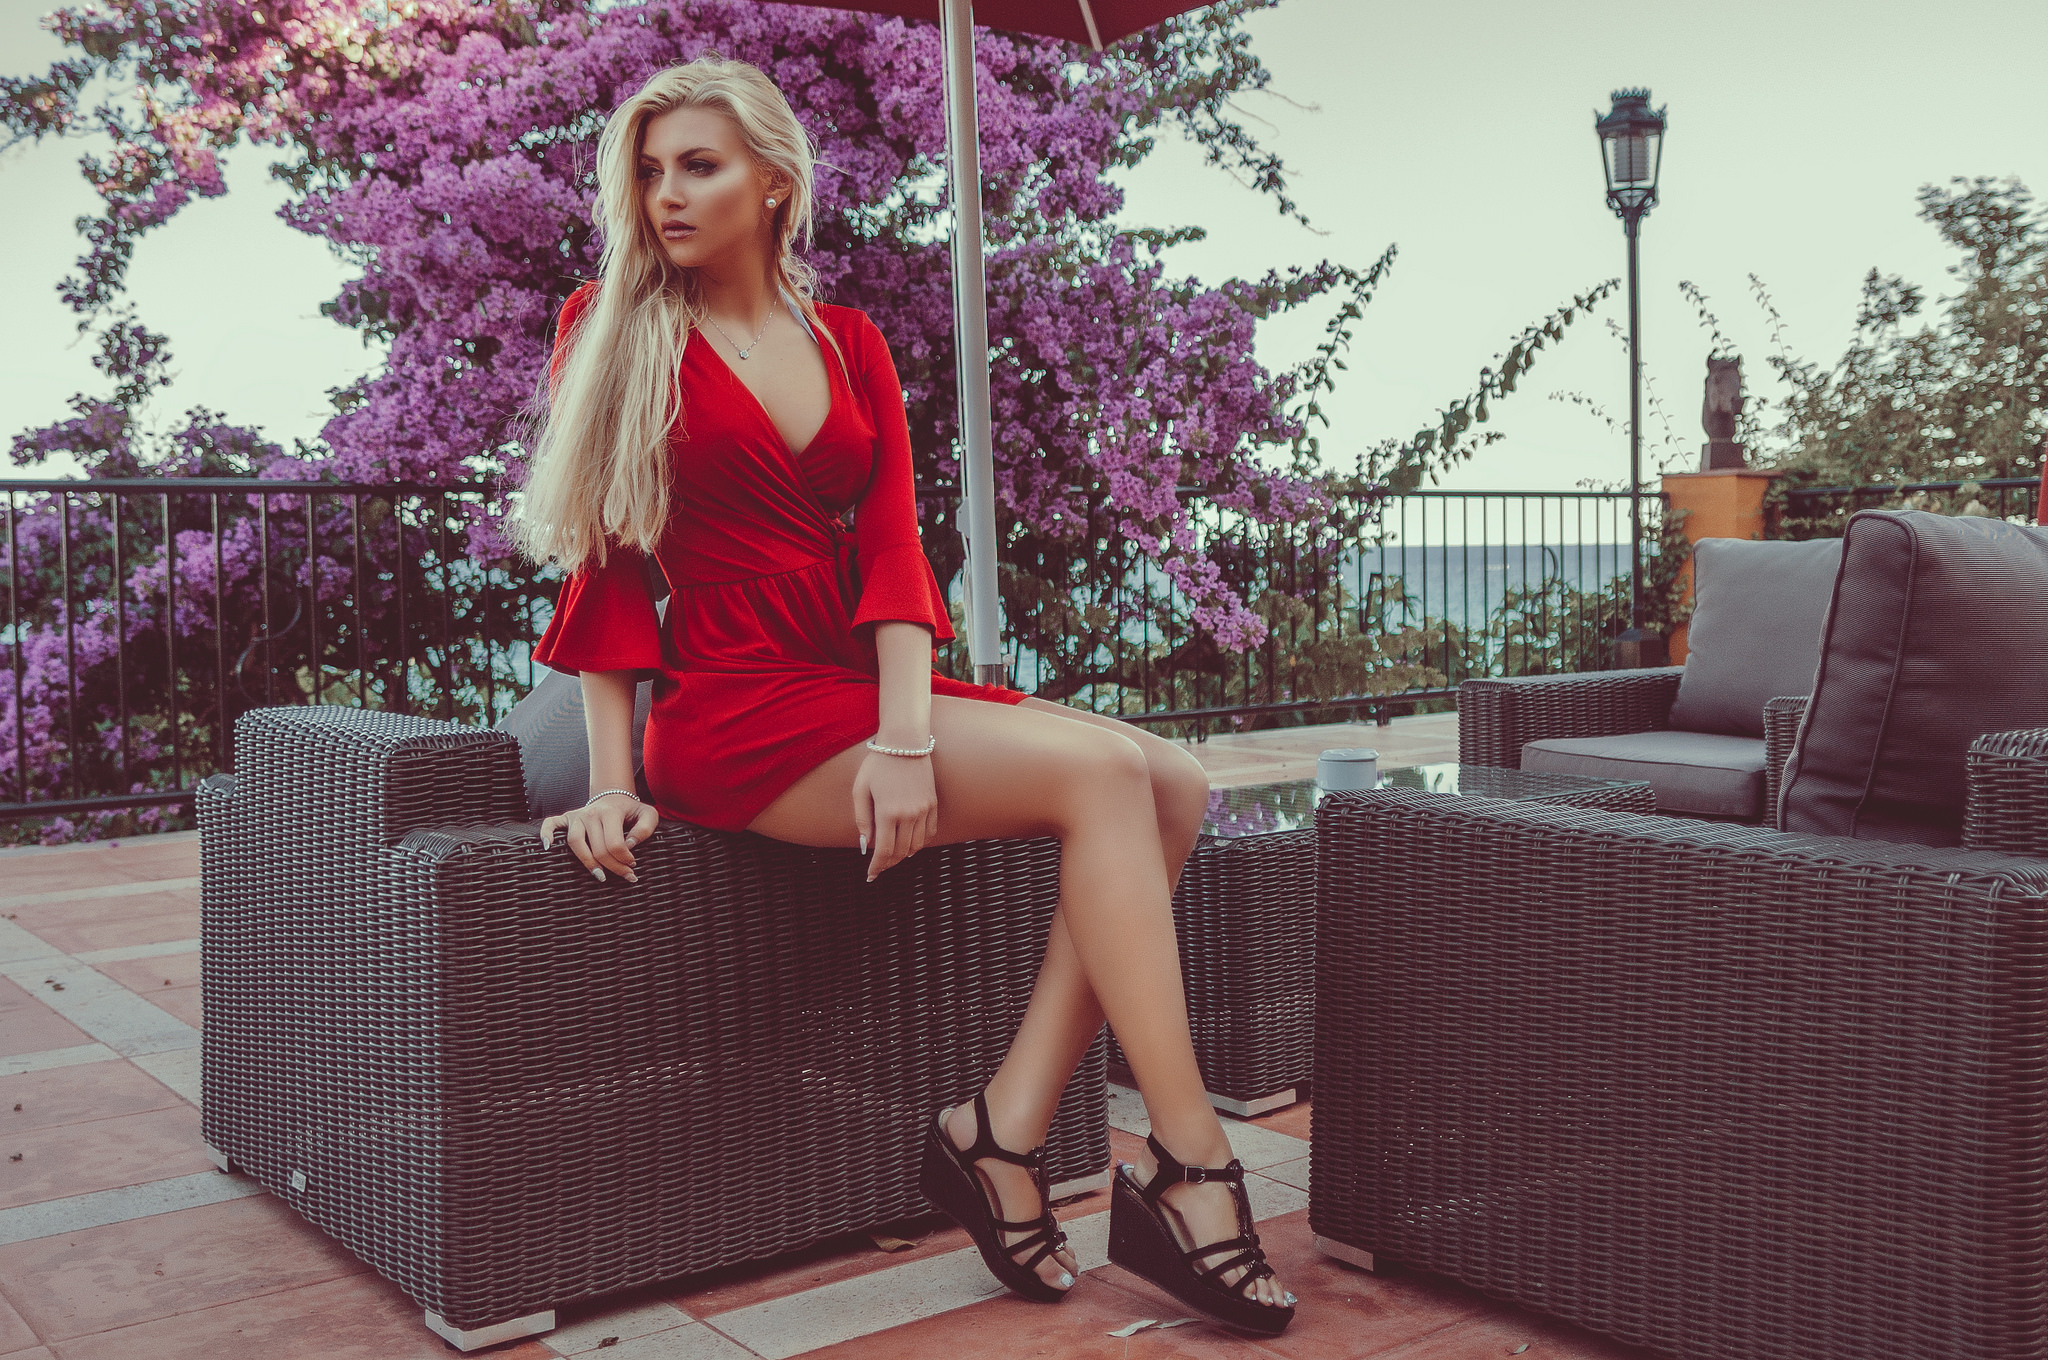 Women Blonde Red Dress Portrait Tanned Sitting Looking Away Women Outdoors Necklace Spanish Girls Sp 2048x1360